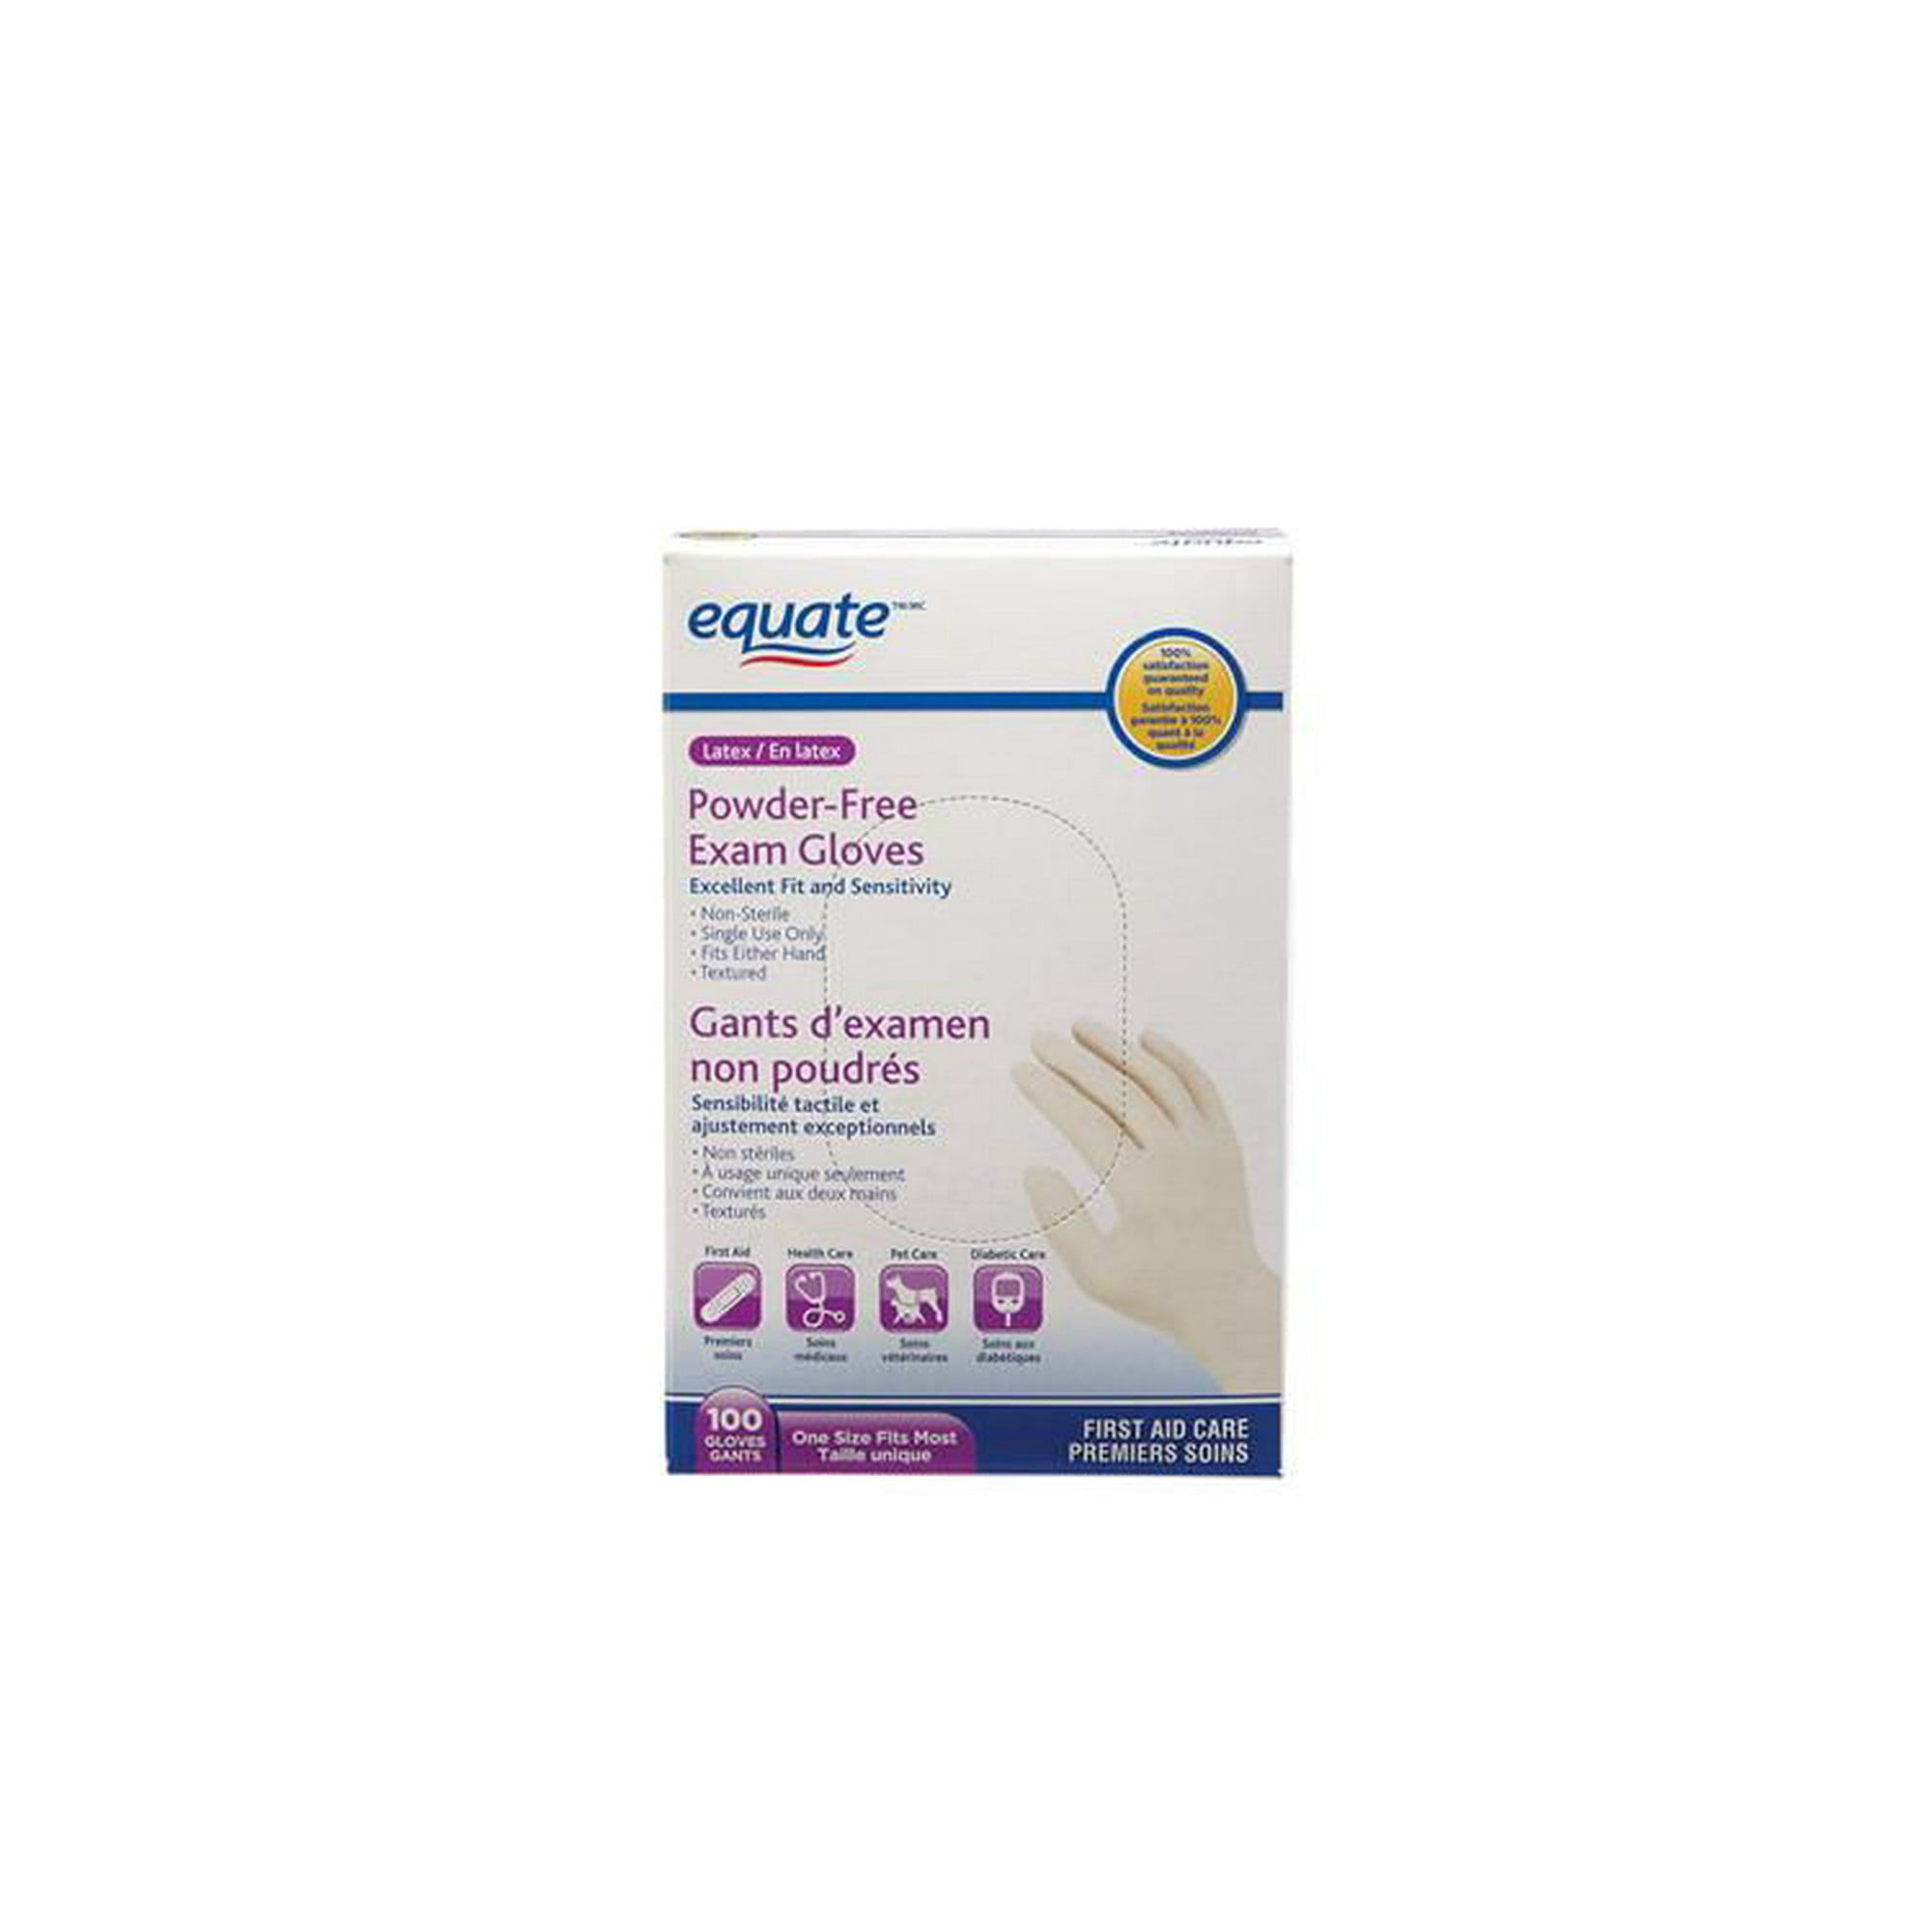 Equate Latex Powder-Free Exam Gloves, 100 Gloves, One Size Fits